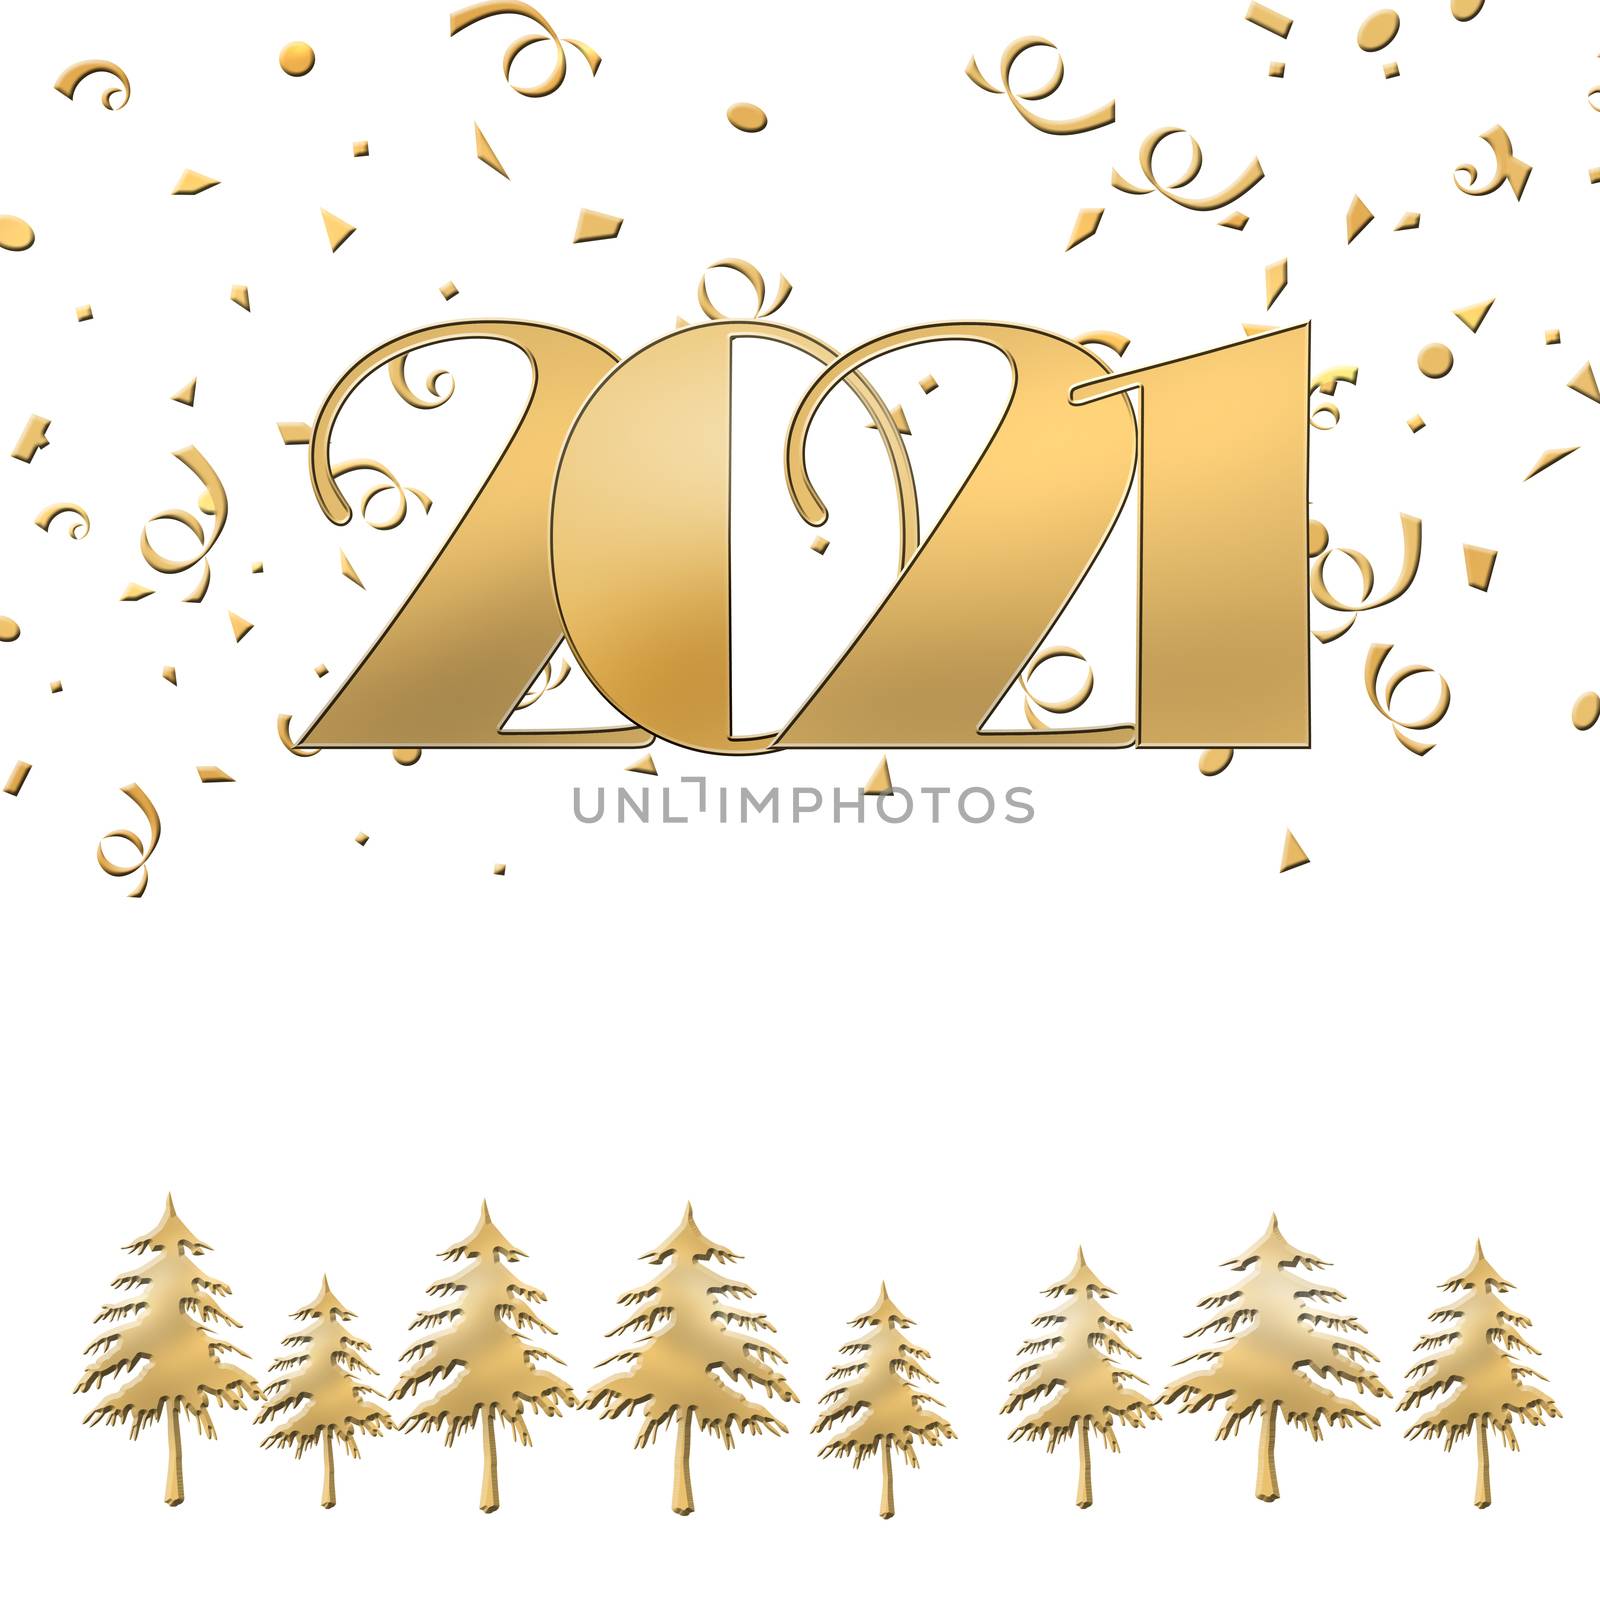 2021 Happy new year Merry Christmas gold text on white background with gold christmas trees and confetti. Elegant gold 2021 with light. Minimalistic text template. Copy space, mock up. 3D illustration